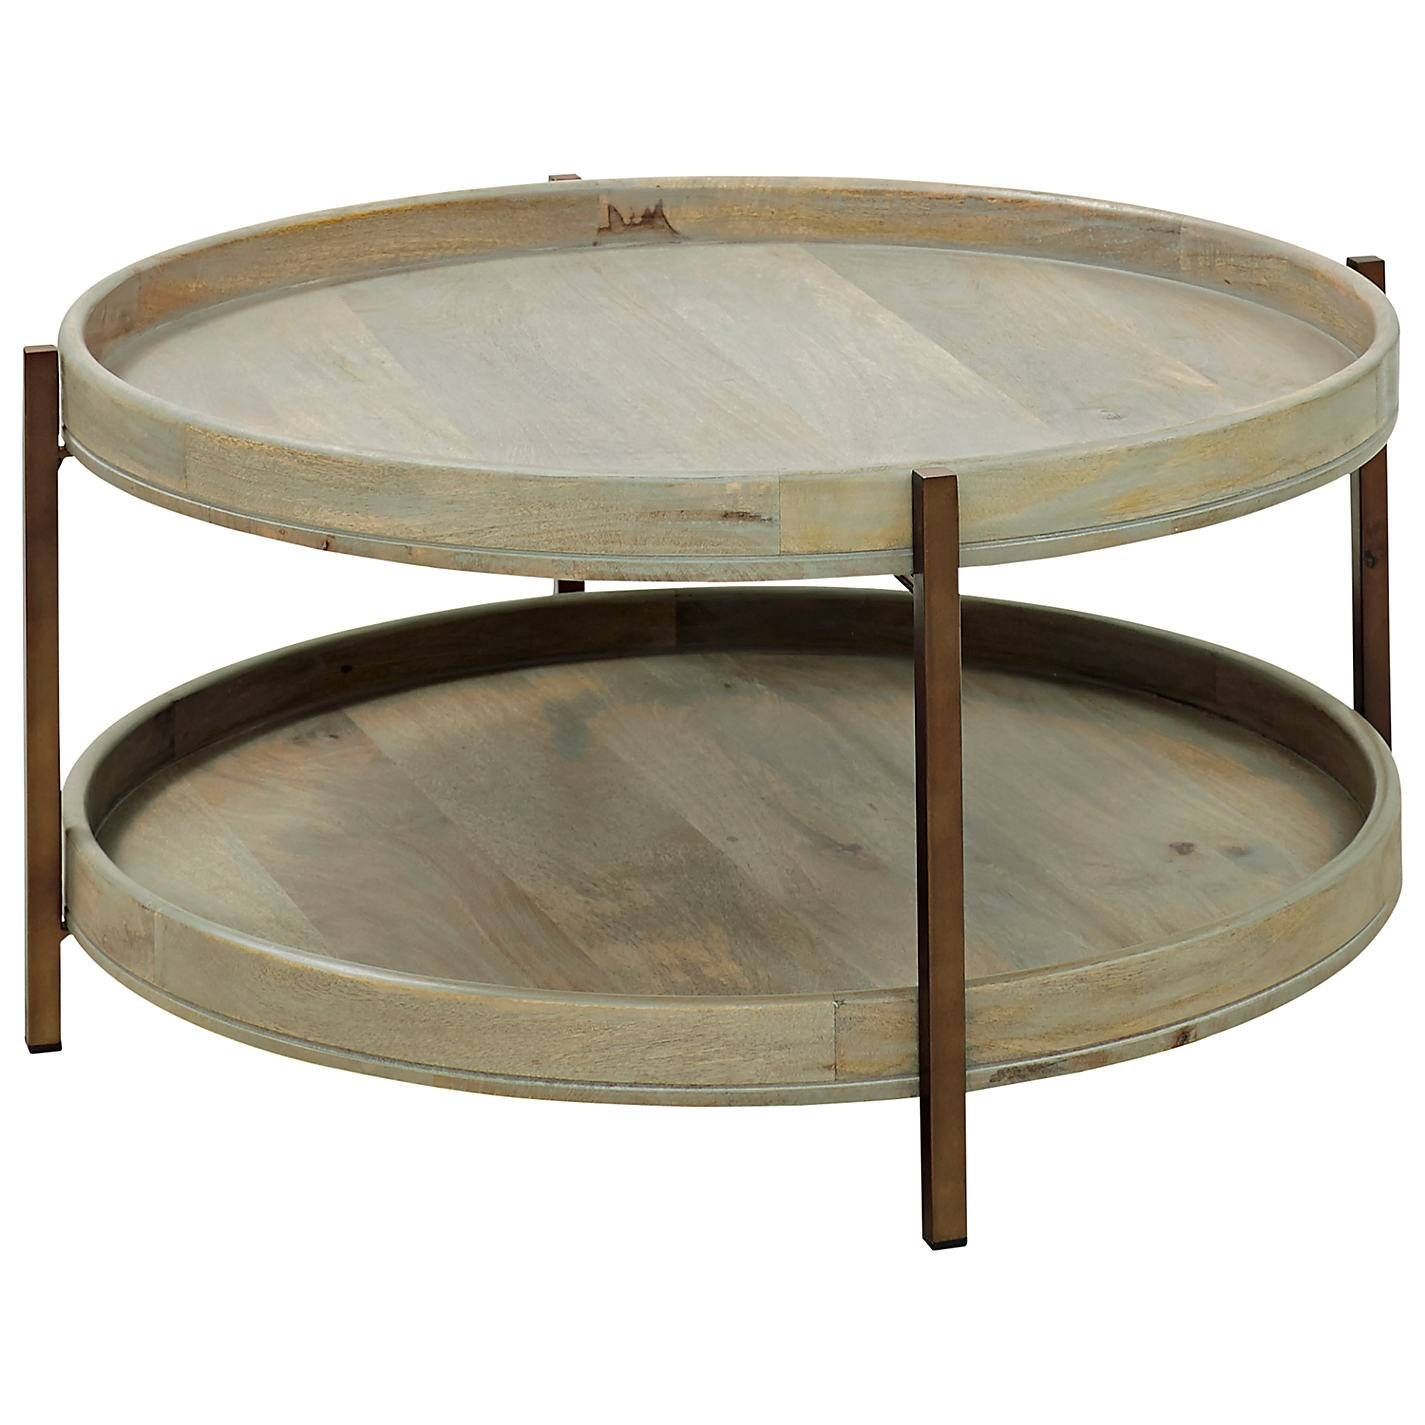 Round Trays For Coffee Tables – Round Trays For Coffee Tables Pertaining To Round Tray Coffee Tables (View 6 of 30)